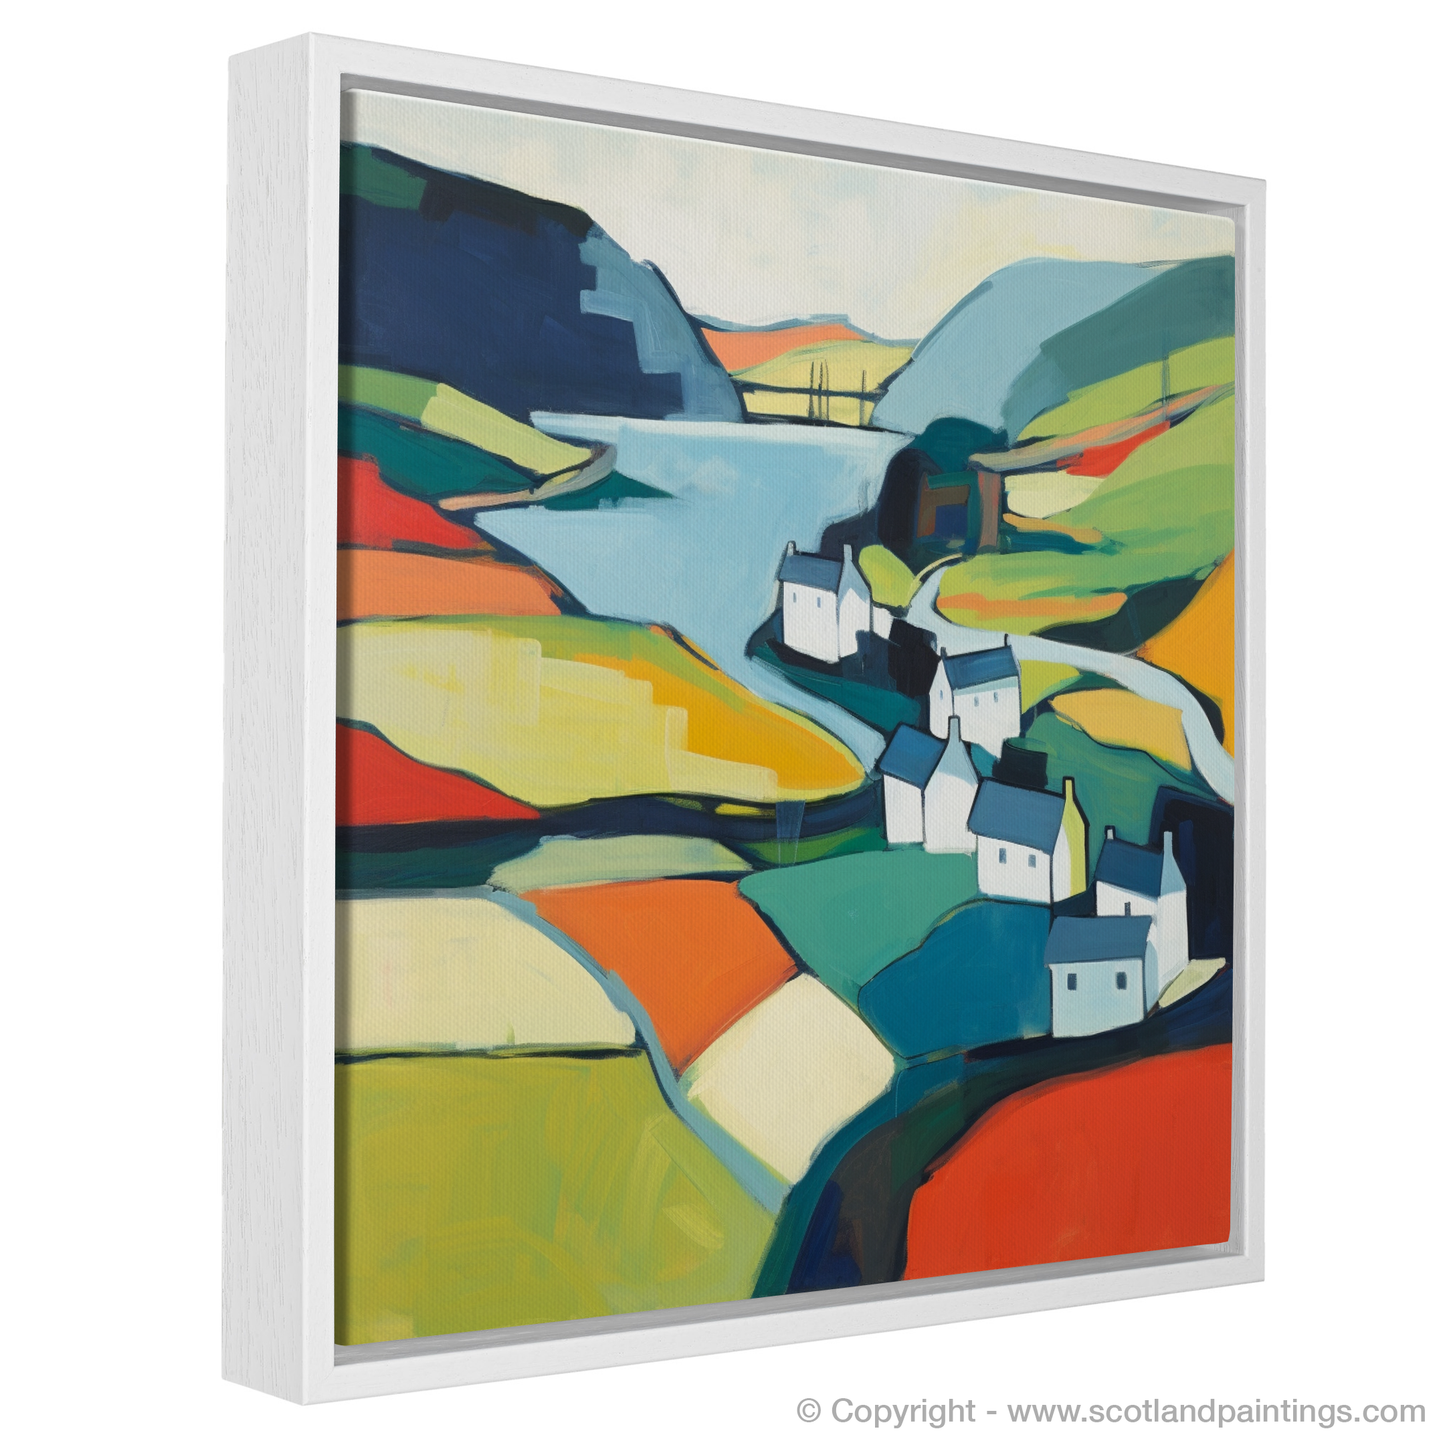 Painting and Art Print of Glenmore, Highlands entitled "Abstract Essence of Glenmore Highlands".